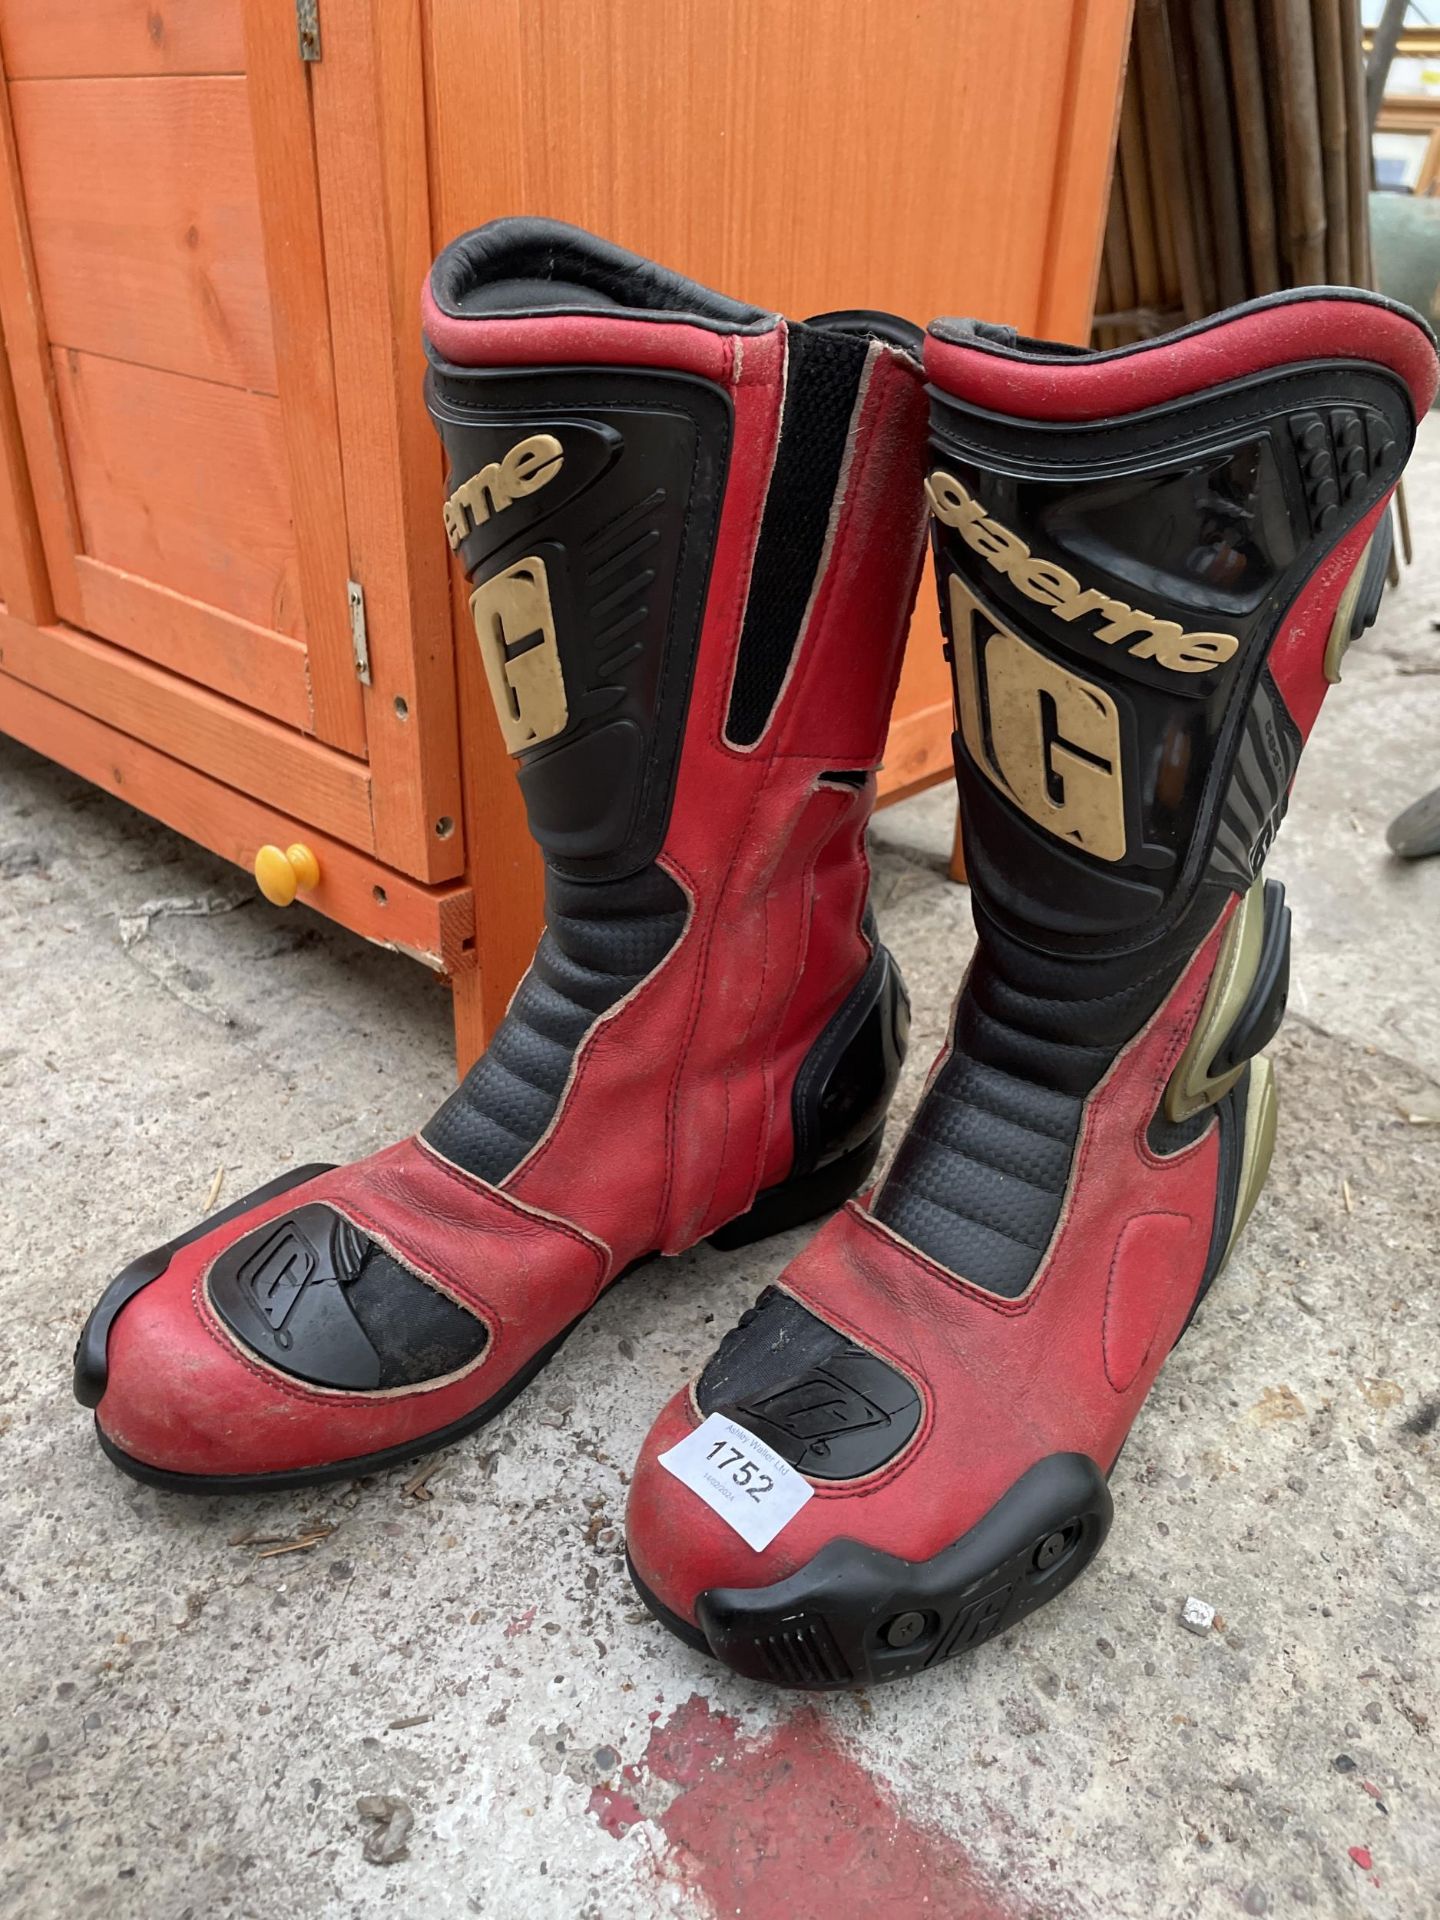 A PAIR OF SIZE 44EU GAERNE MOTORBIKE BOOTS